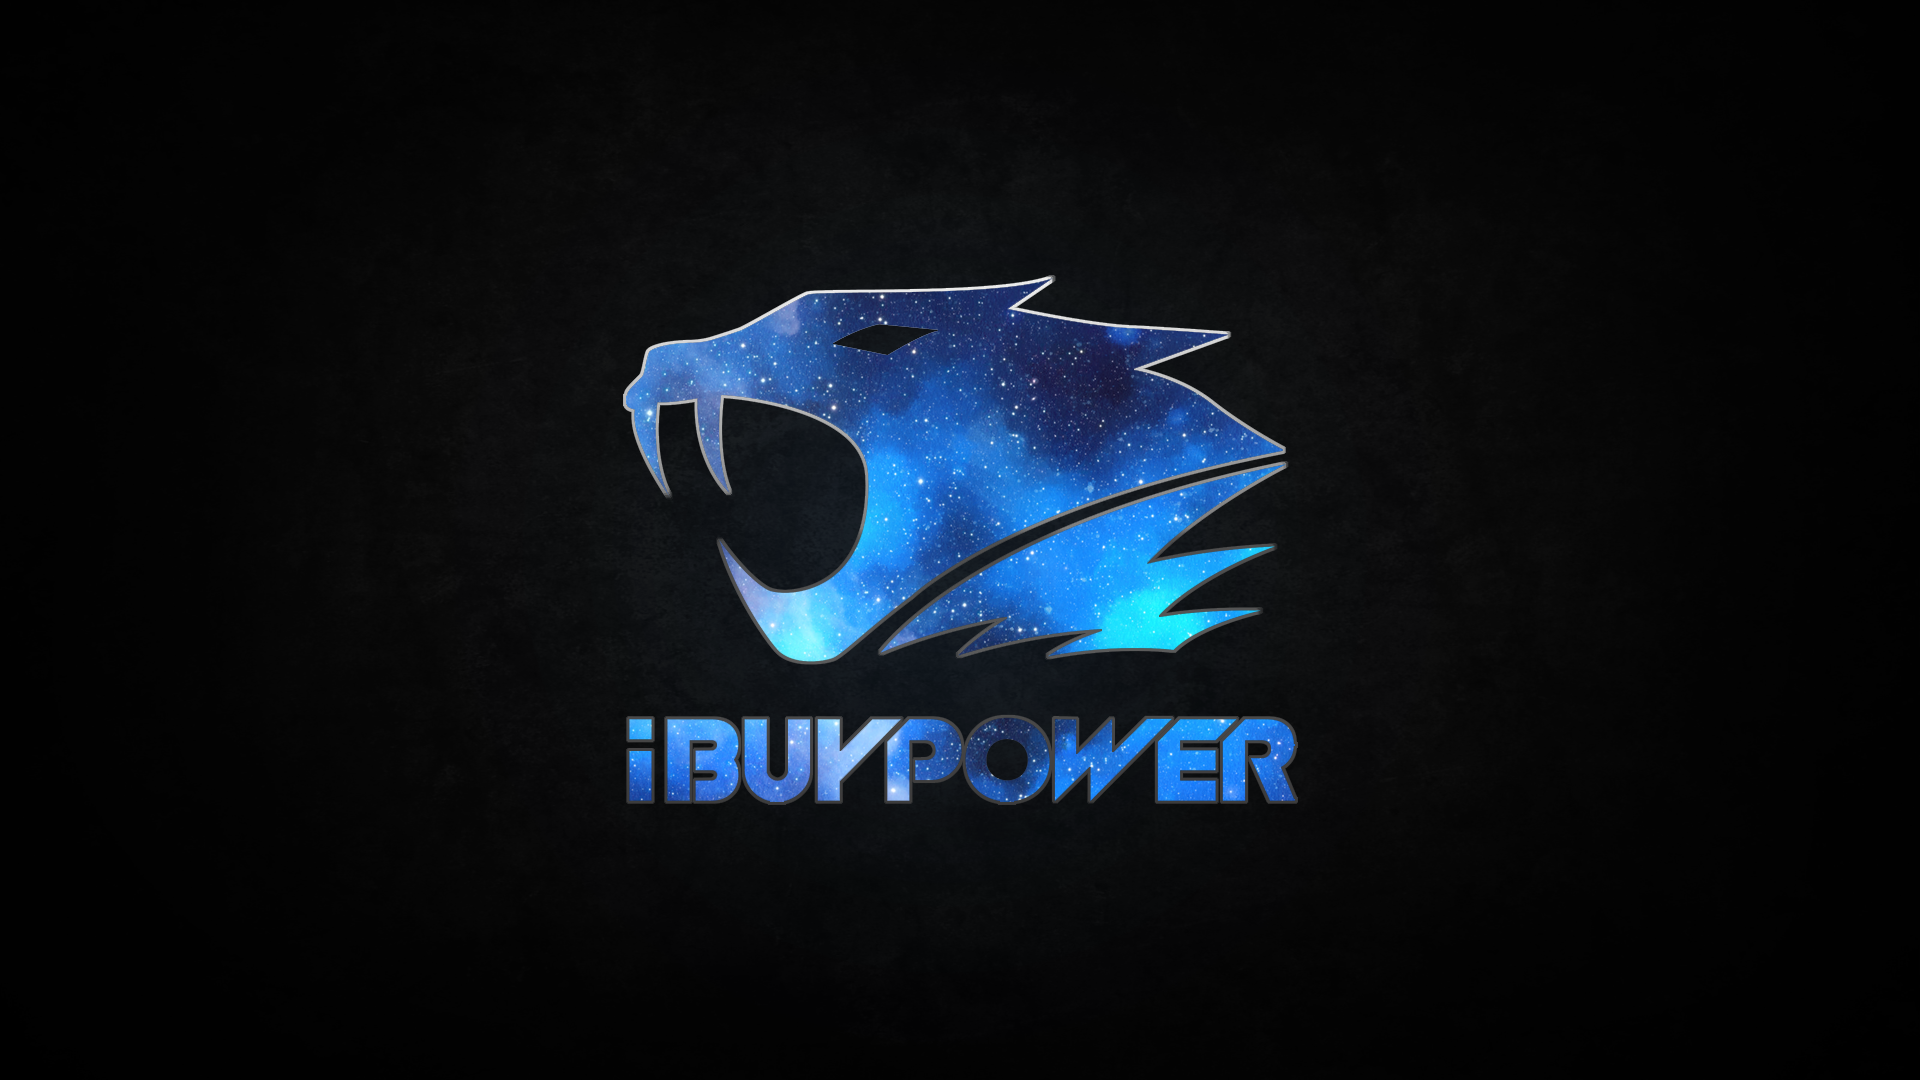 iBuyPower, CS:GO W, papers and Backgrounds. helpful non helpful. csgowallpa...